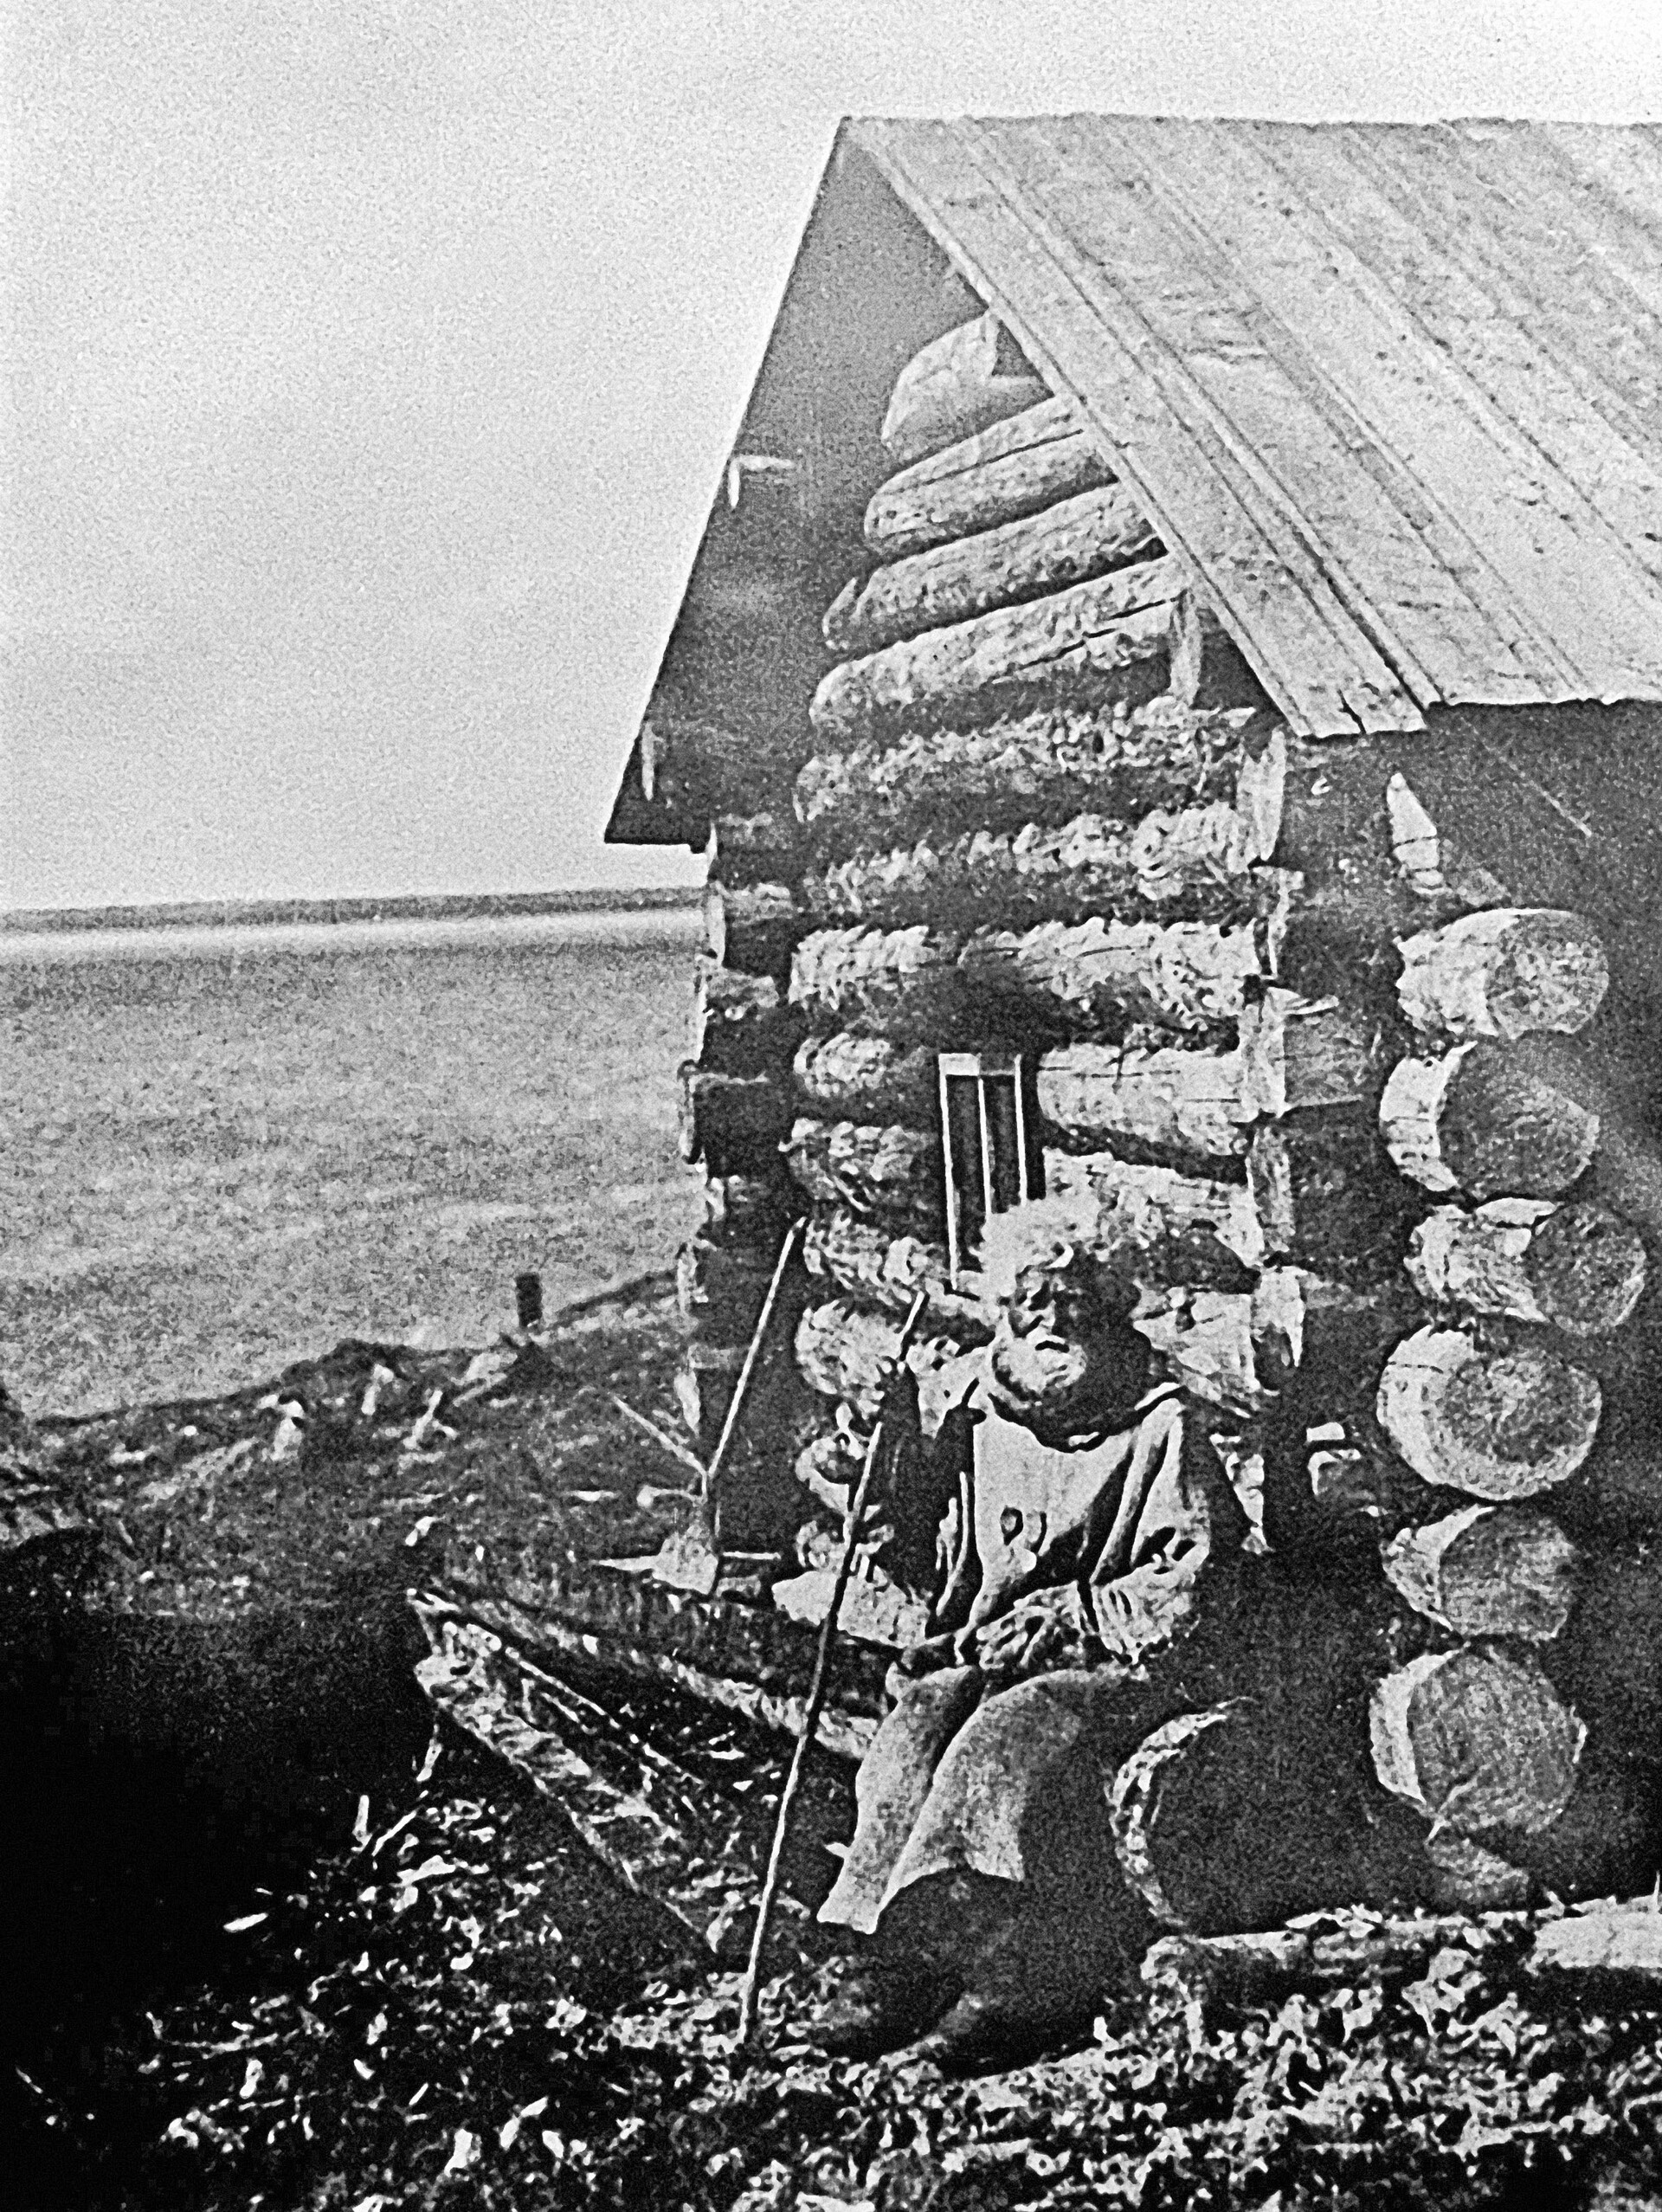 One of the first inhabitants of Murmansk.